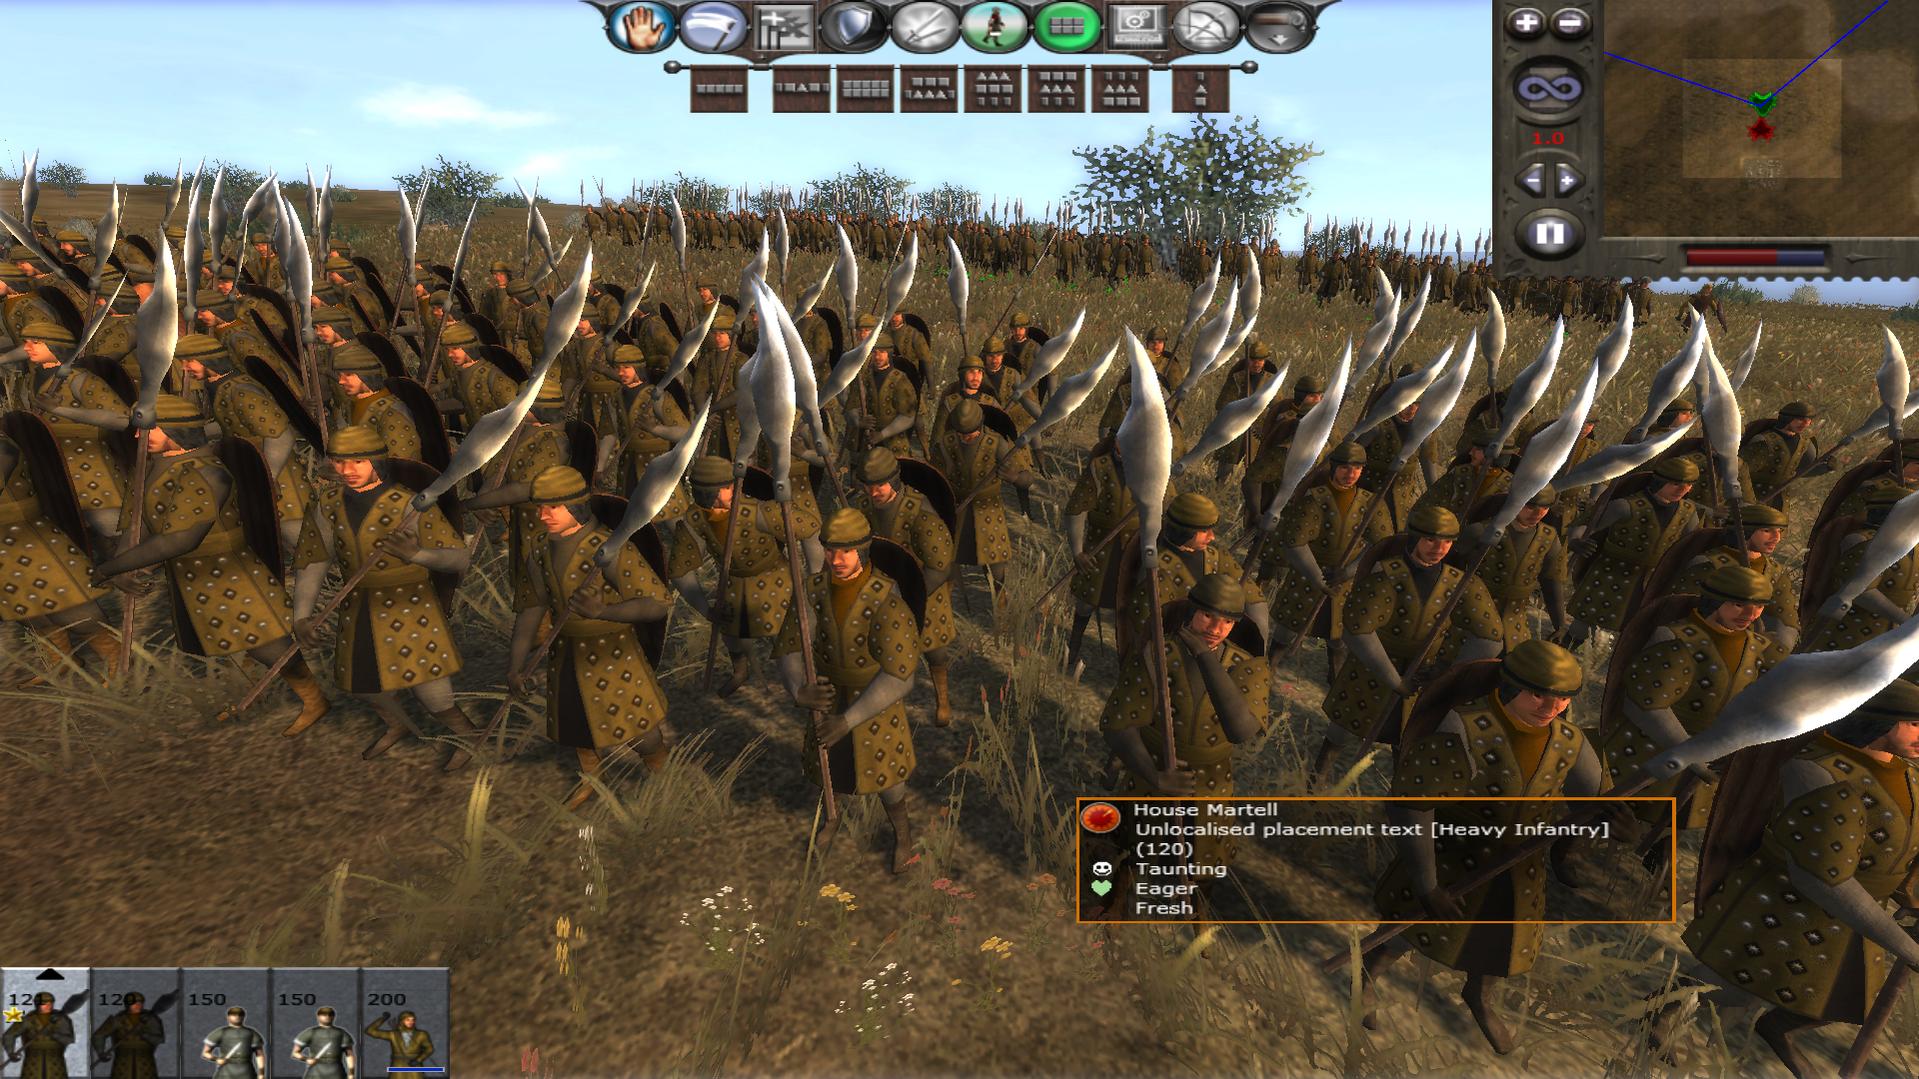 New House Martell Glaive unit! image - Game of Thrones mod for Medieval II: Total War: Kingdoms